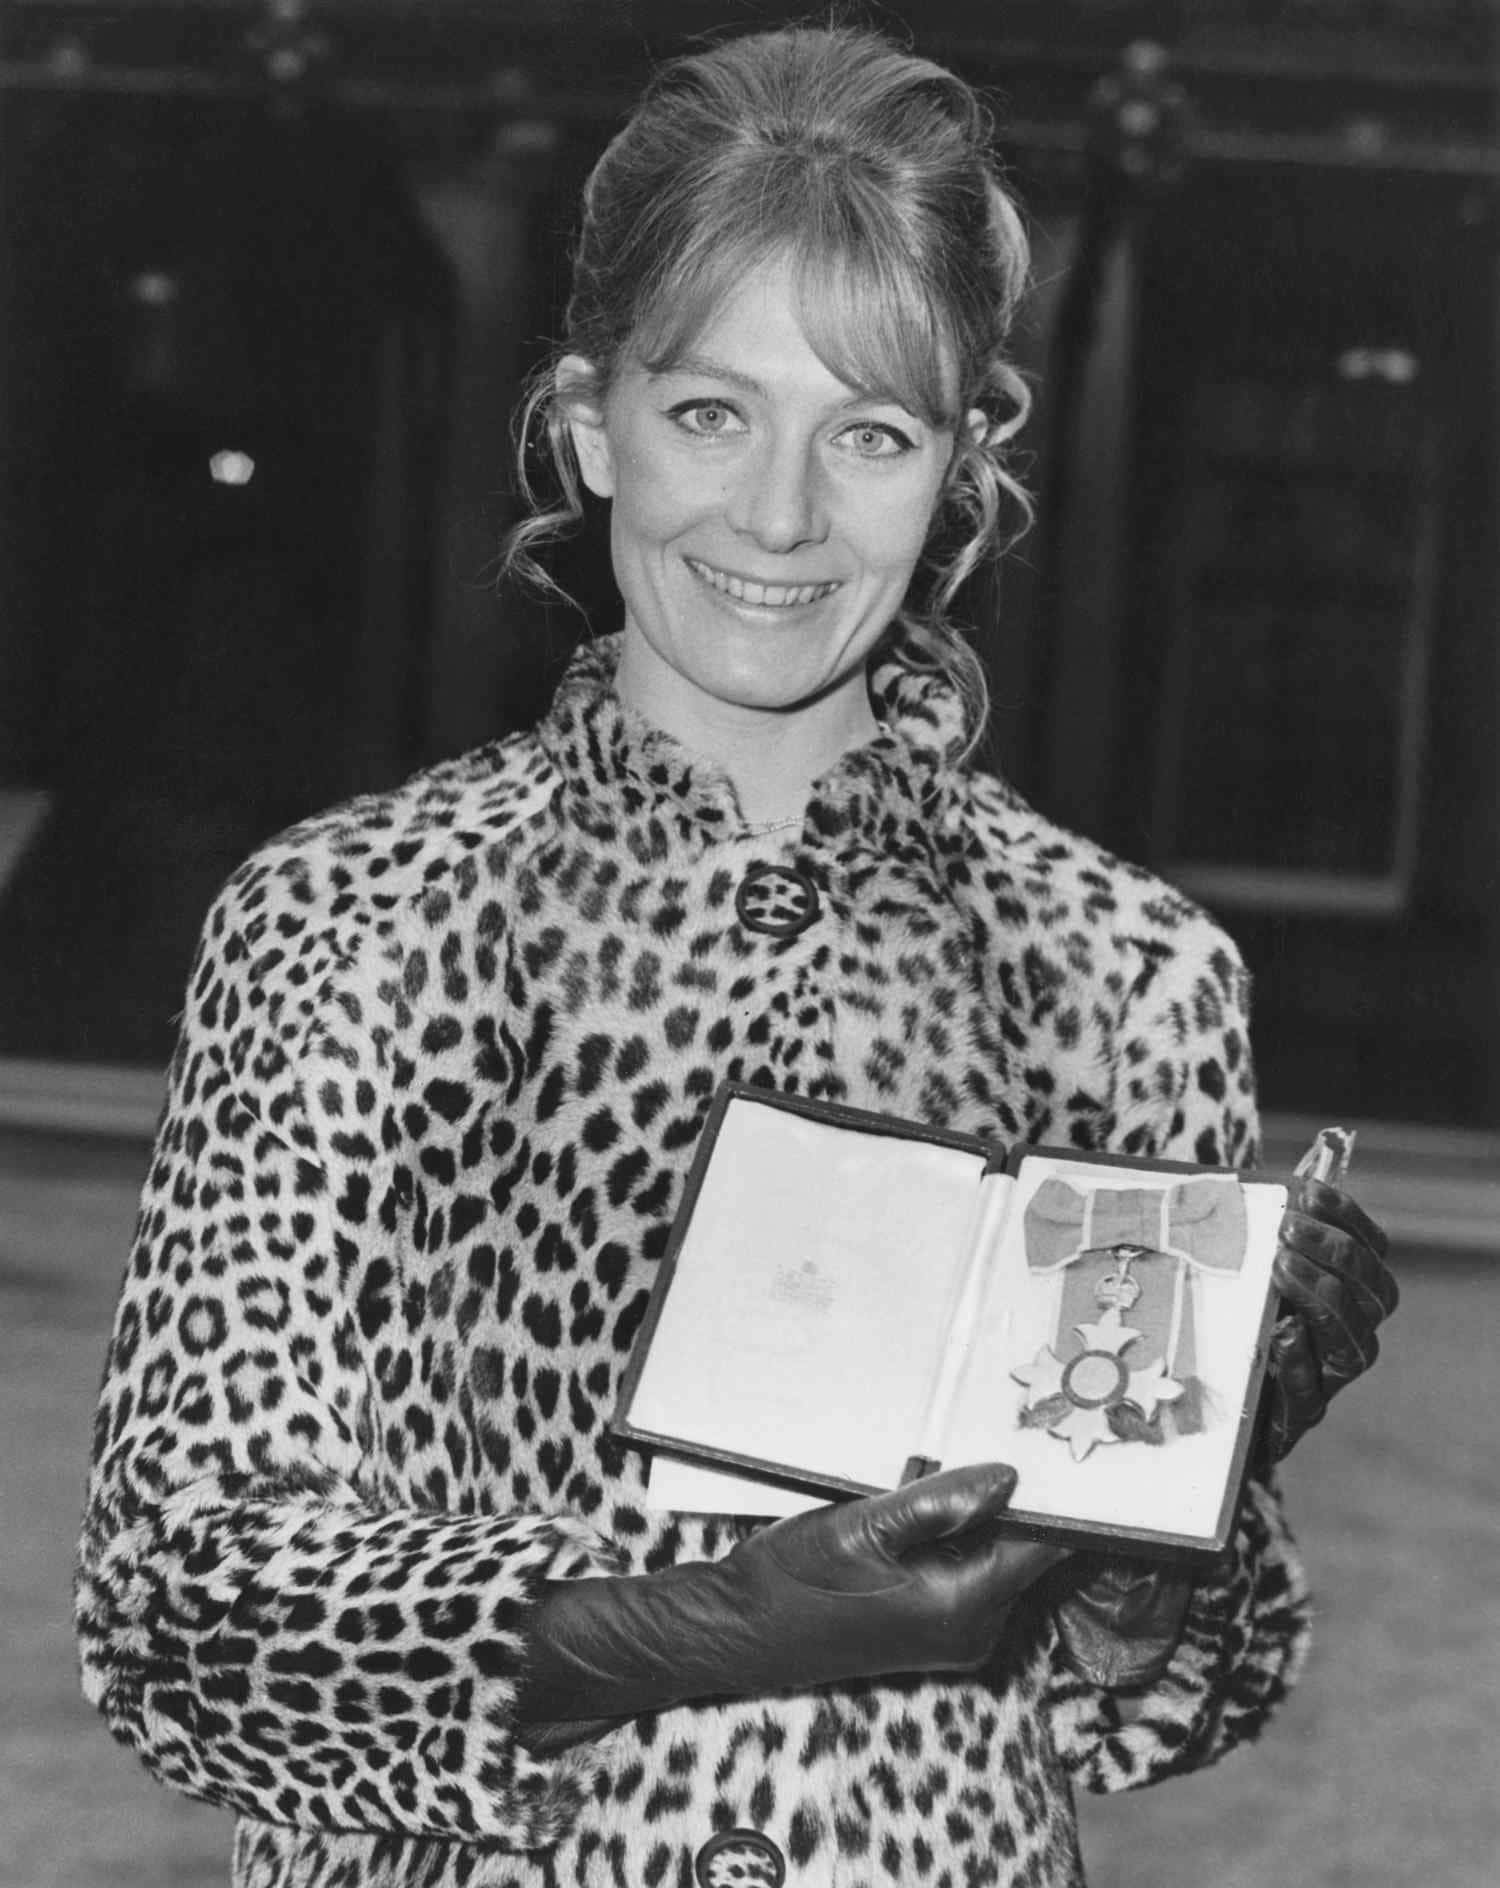 Caption: Vanessa Redgrave During A Stage Performance Wallpaper